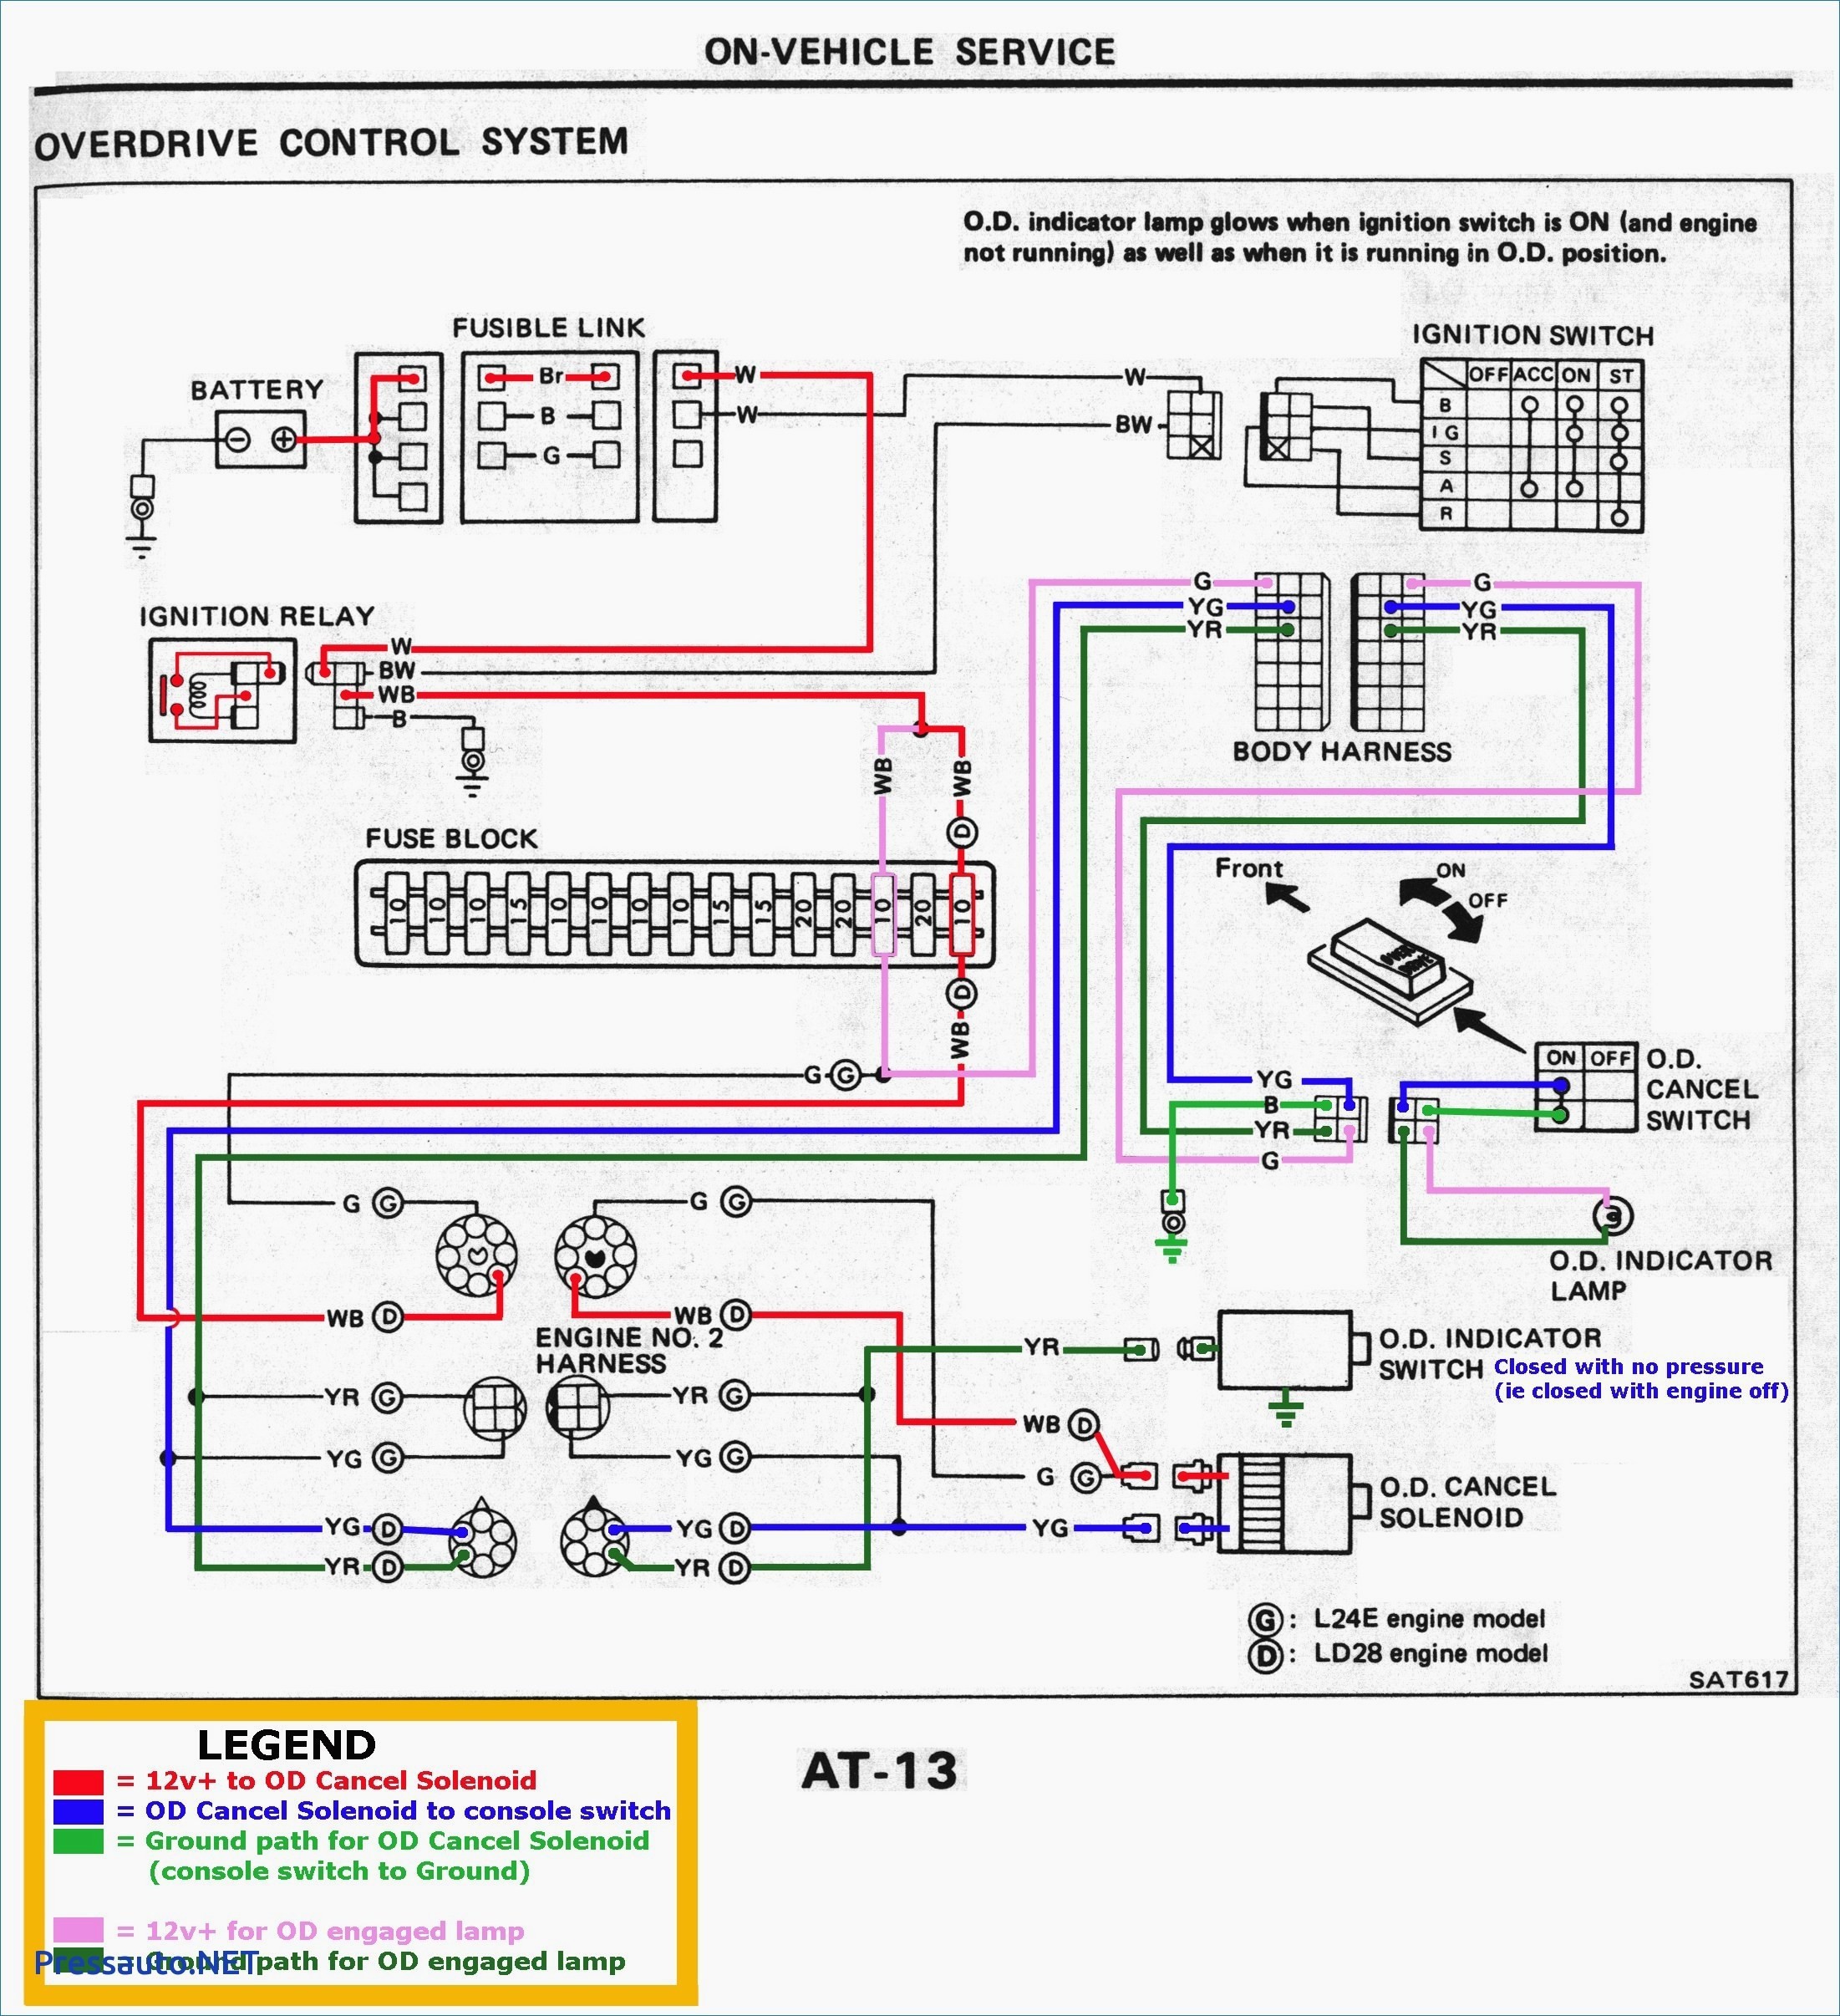 Wiring Diagrams for toyota Corolla Best toyota Wiring Diagram Color Codes New Magnificent Wiring Diagrams